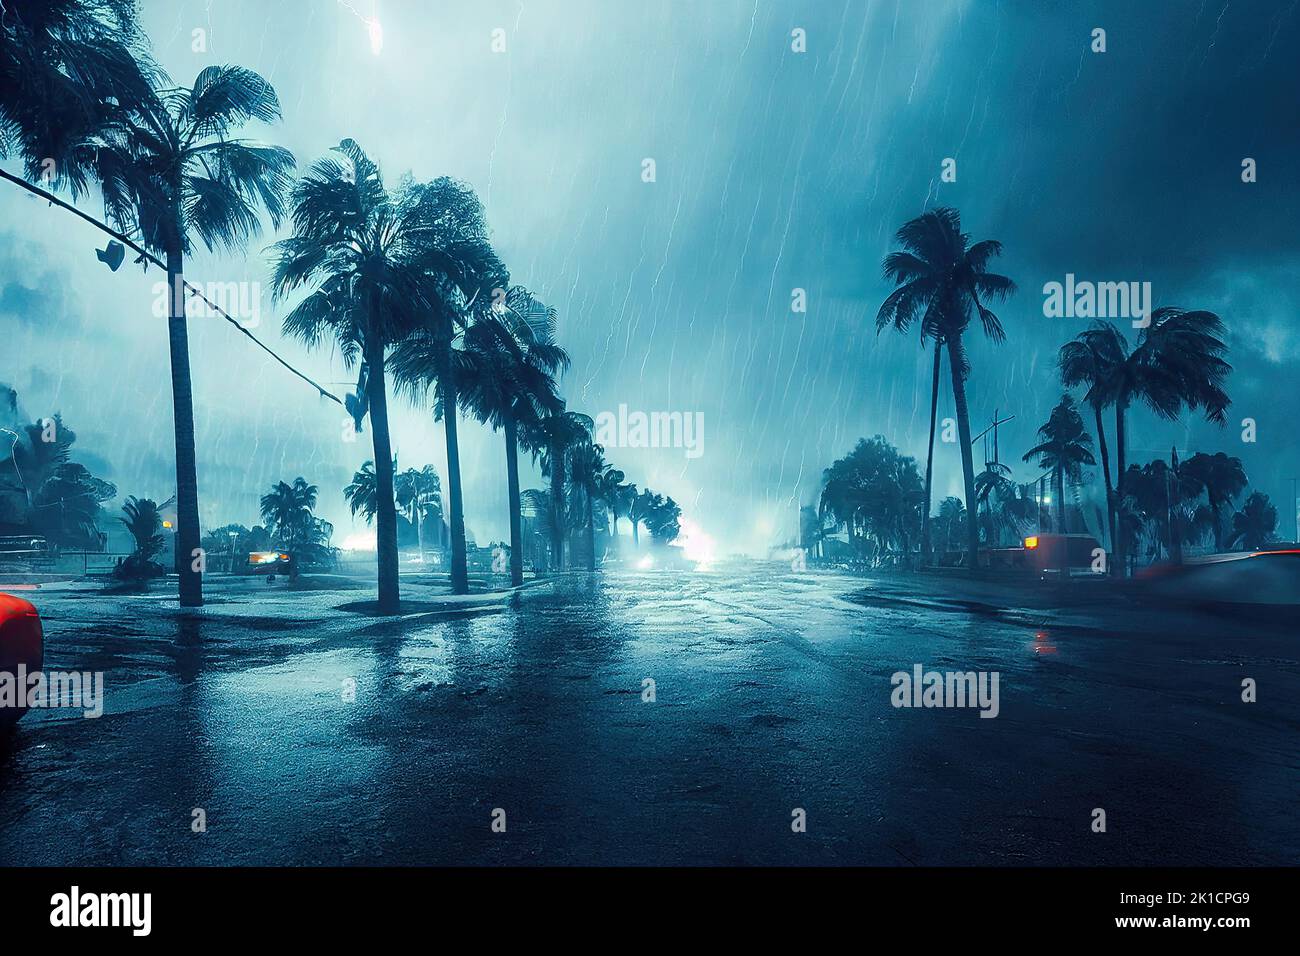 Hurricane also called tornado or typhoon with lightnings and twister in the storm on a city street with palms. Natural disasters in towns caused by Stock Photo